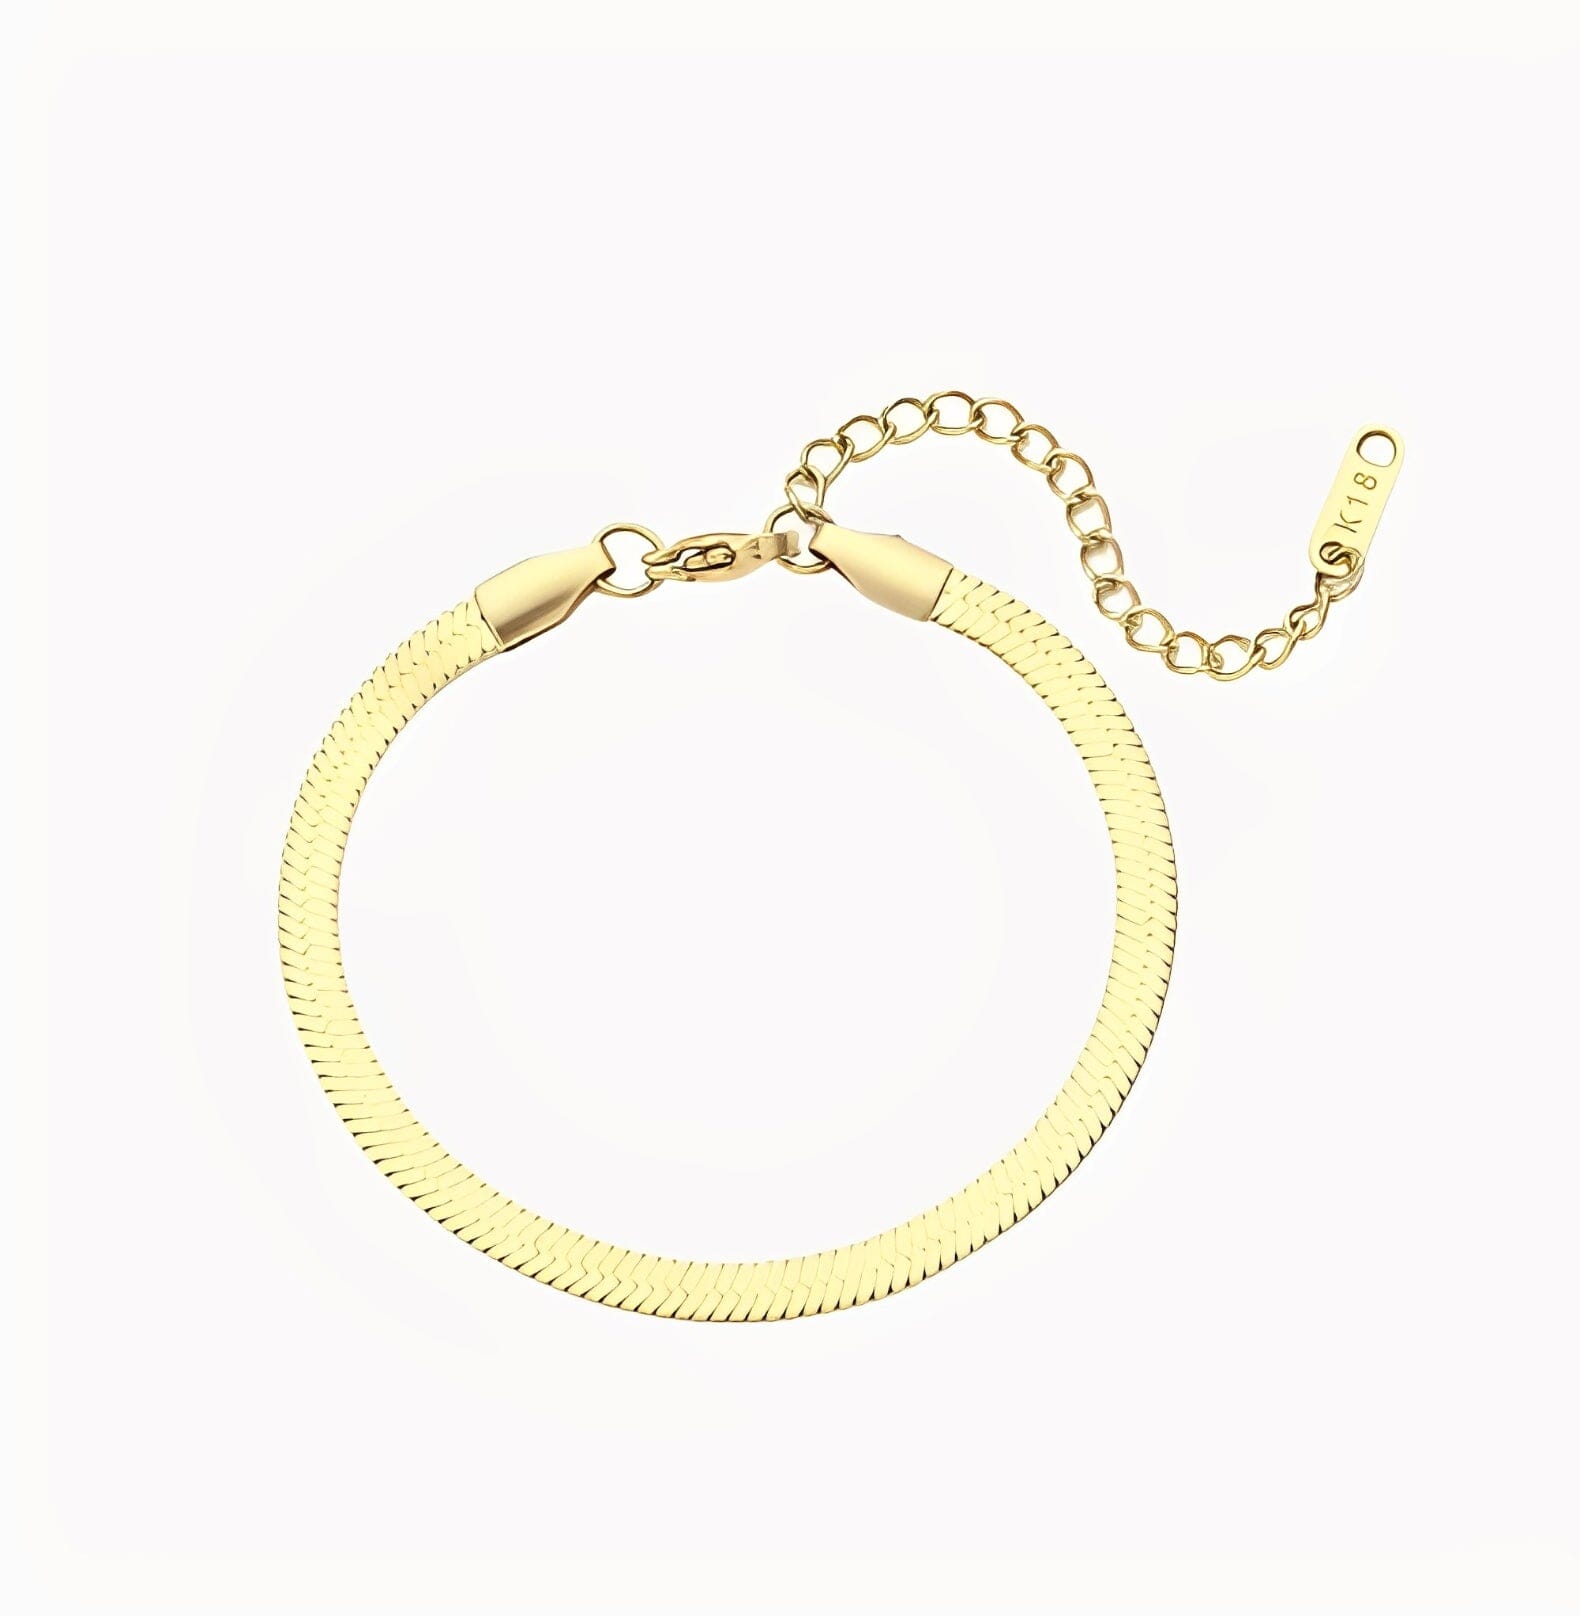 SNAKE BRACELET - GOLD braclet Yubama Jewelry Online Store - The Elegant Designs of Gold and Silver ! 